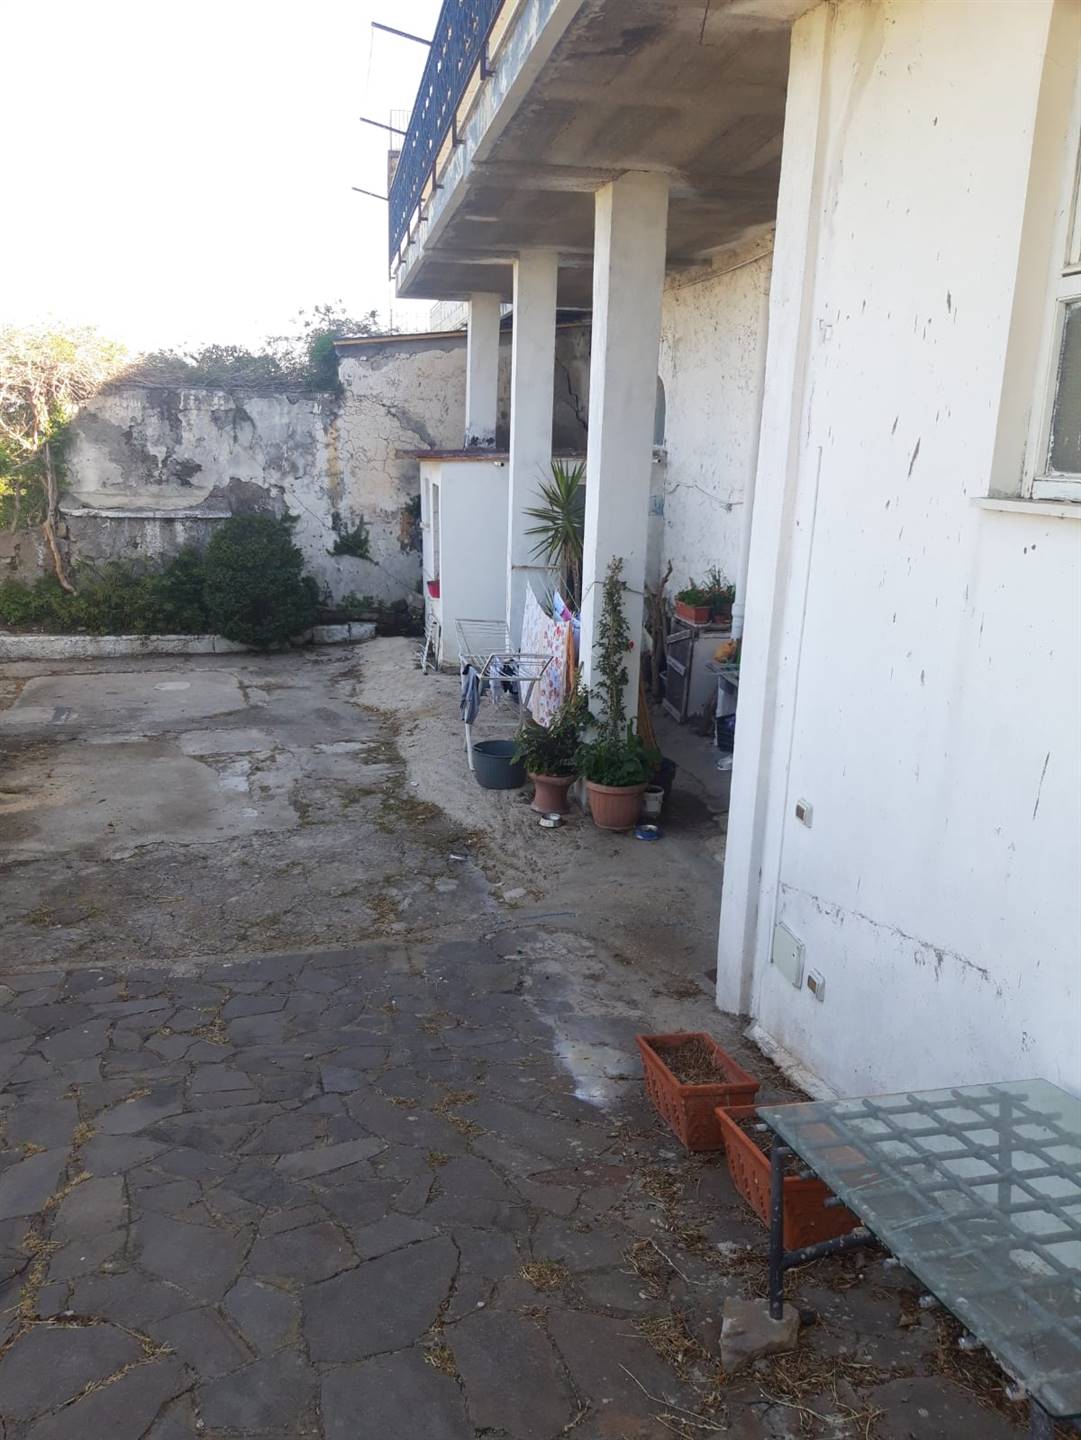 AROLA, VICO EQUENSE, Apartment for sale of 140 Sq. mt., Be restored, Energetic class: G, composed by: 4 Rooms, 2 Bathrooms, Parking space, Cellar, 